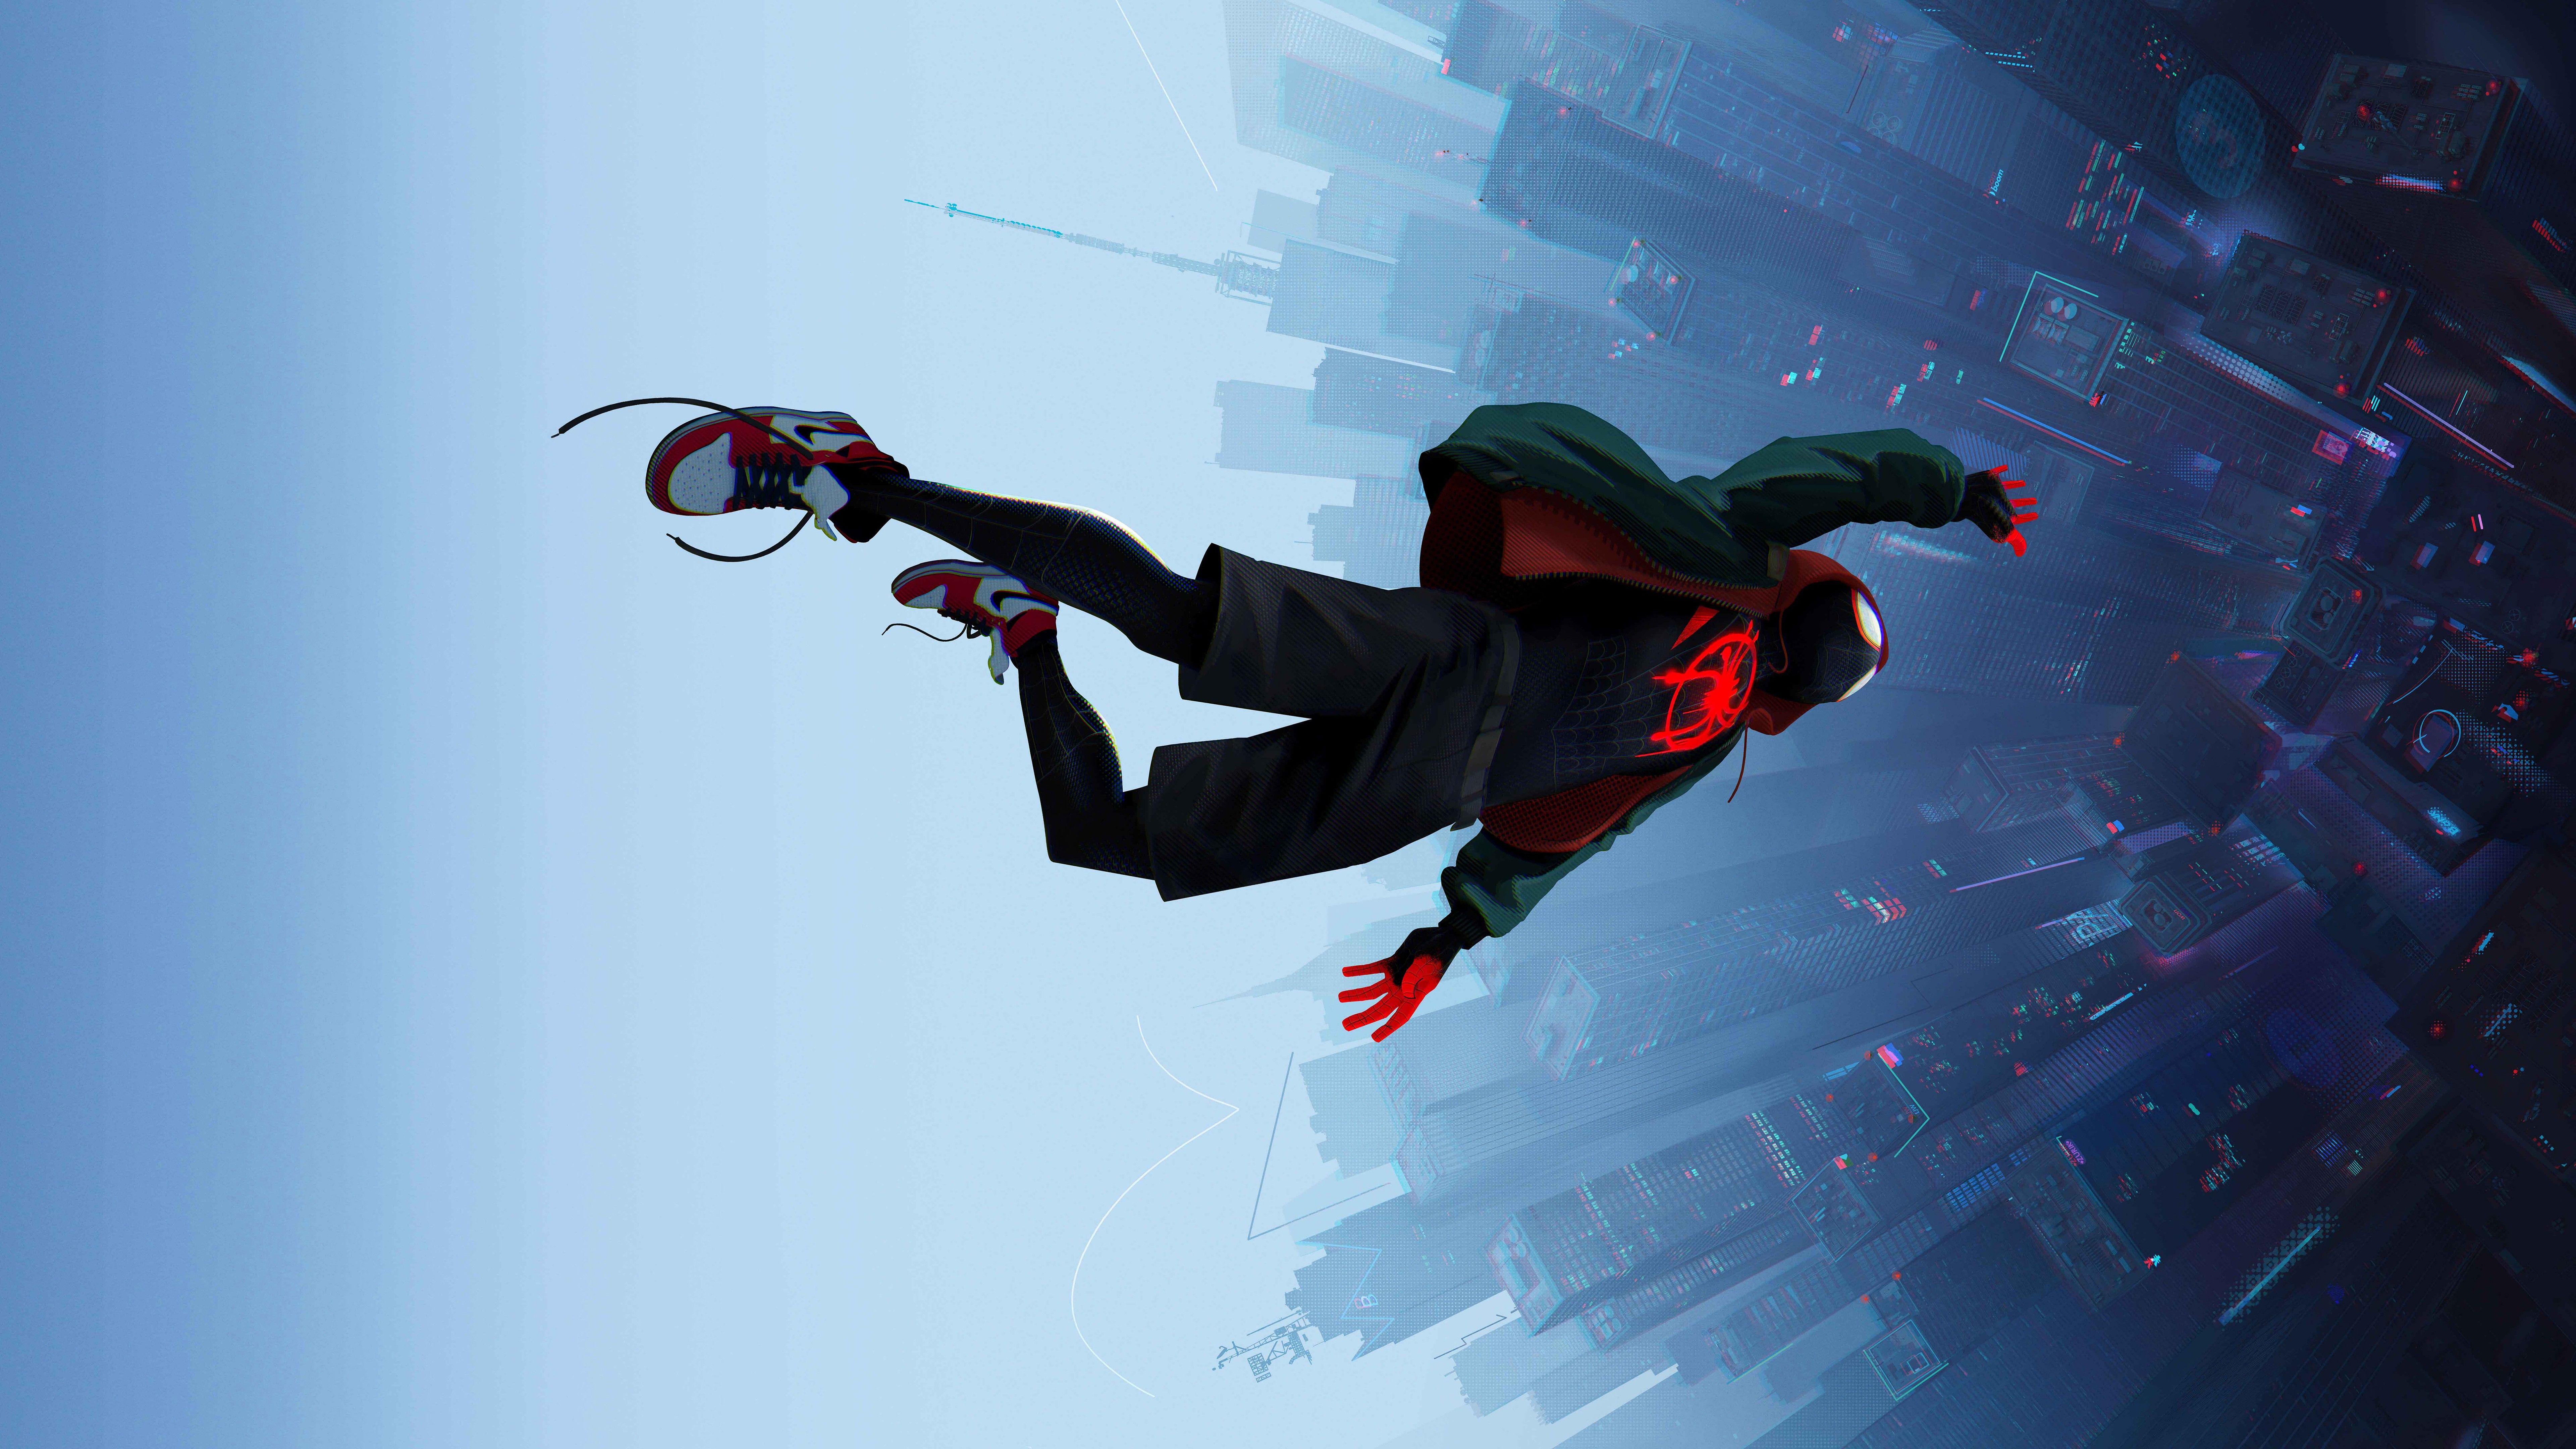 Spider man is flying through the city - 